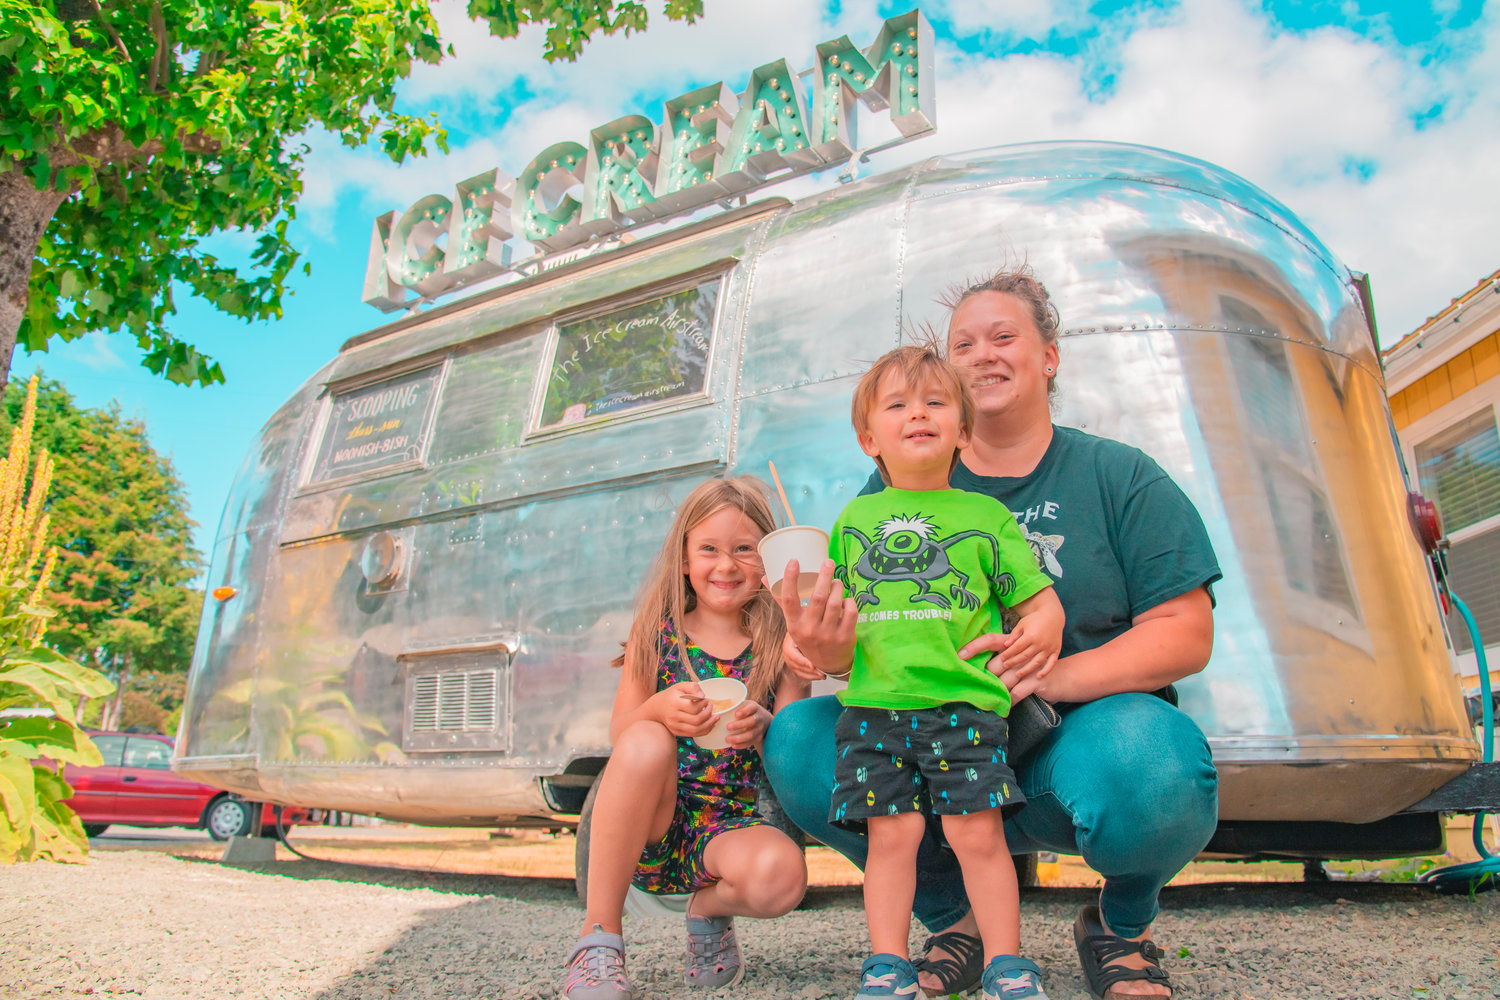 Brynlee and Bennett pose with Shayla Dollar while holding frozen treats from an Ice Cream Airstream Wednesday in Packwood.